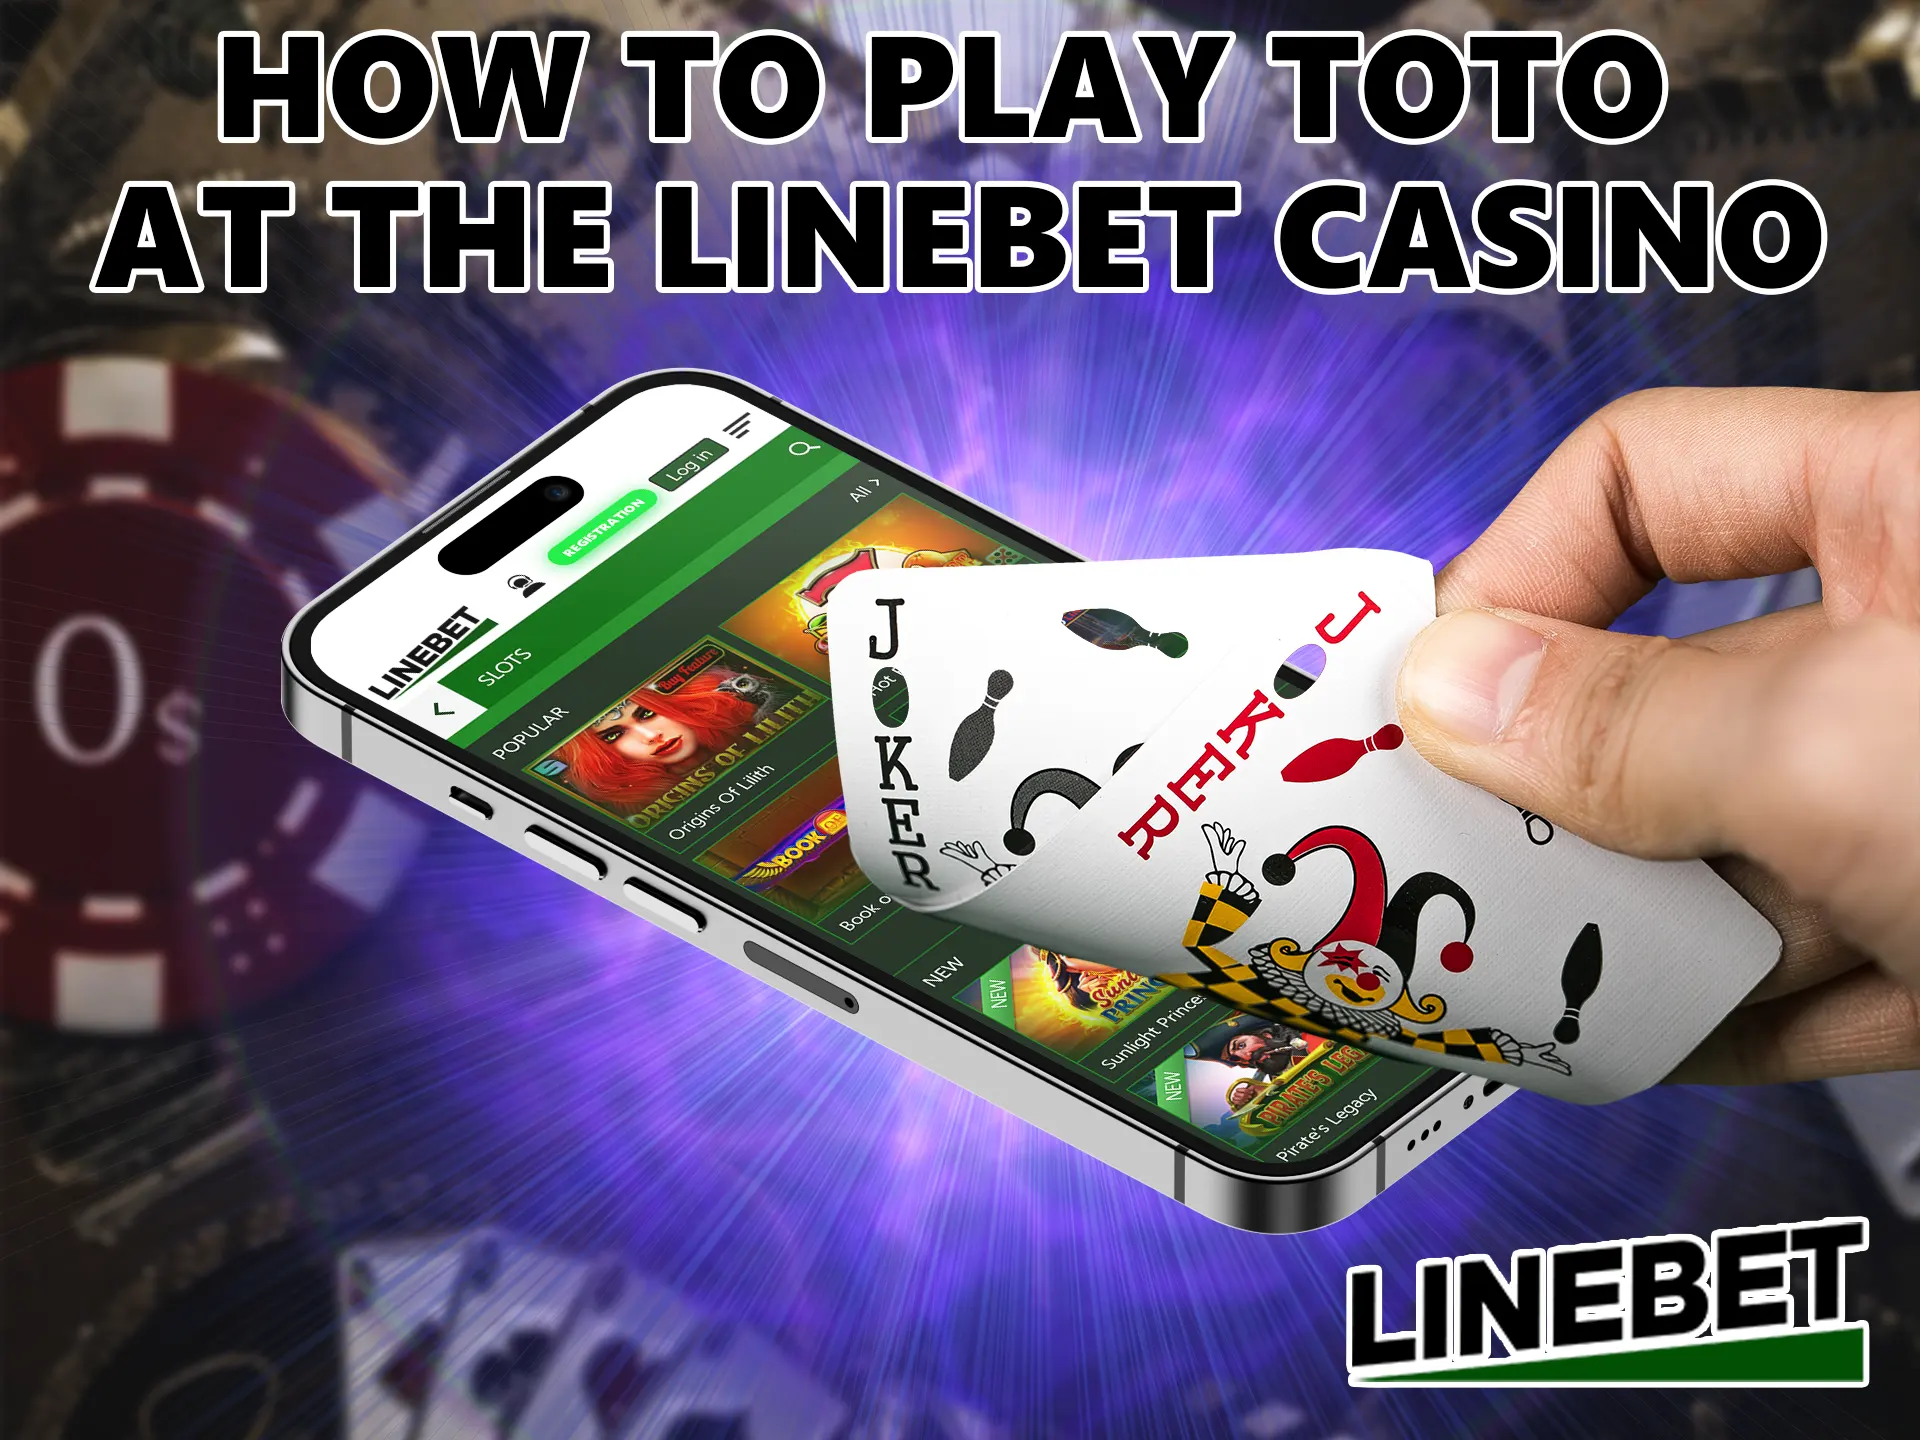 If you don't know how to start playing at Linebet Casino, our step-by-step guide will help you get started.